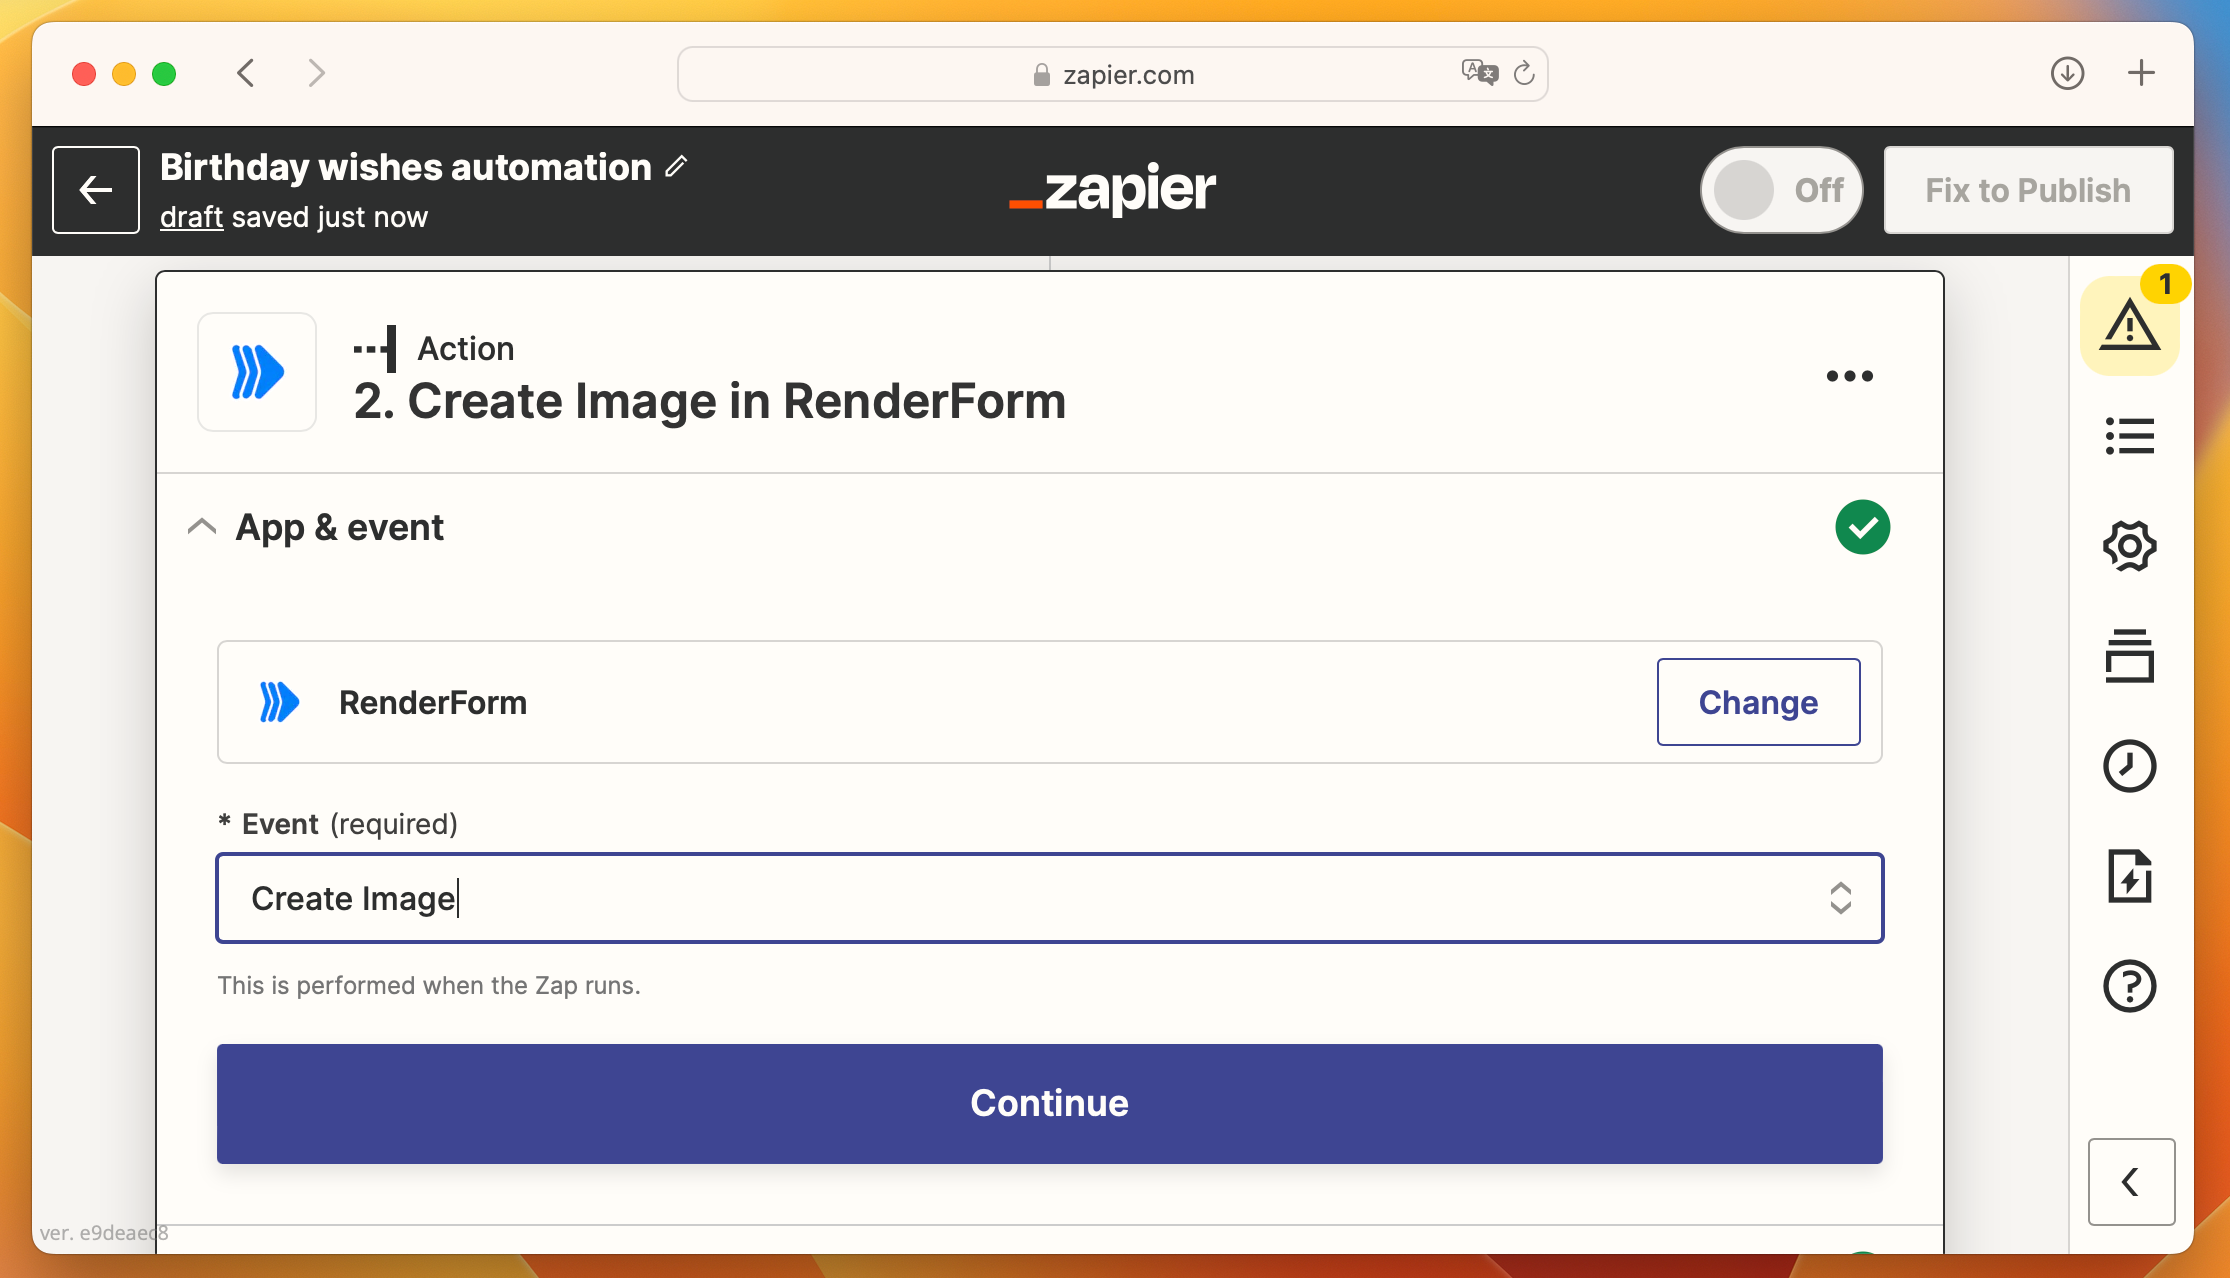 Setting up RenderForm as action in Zapier automation